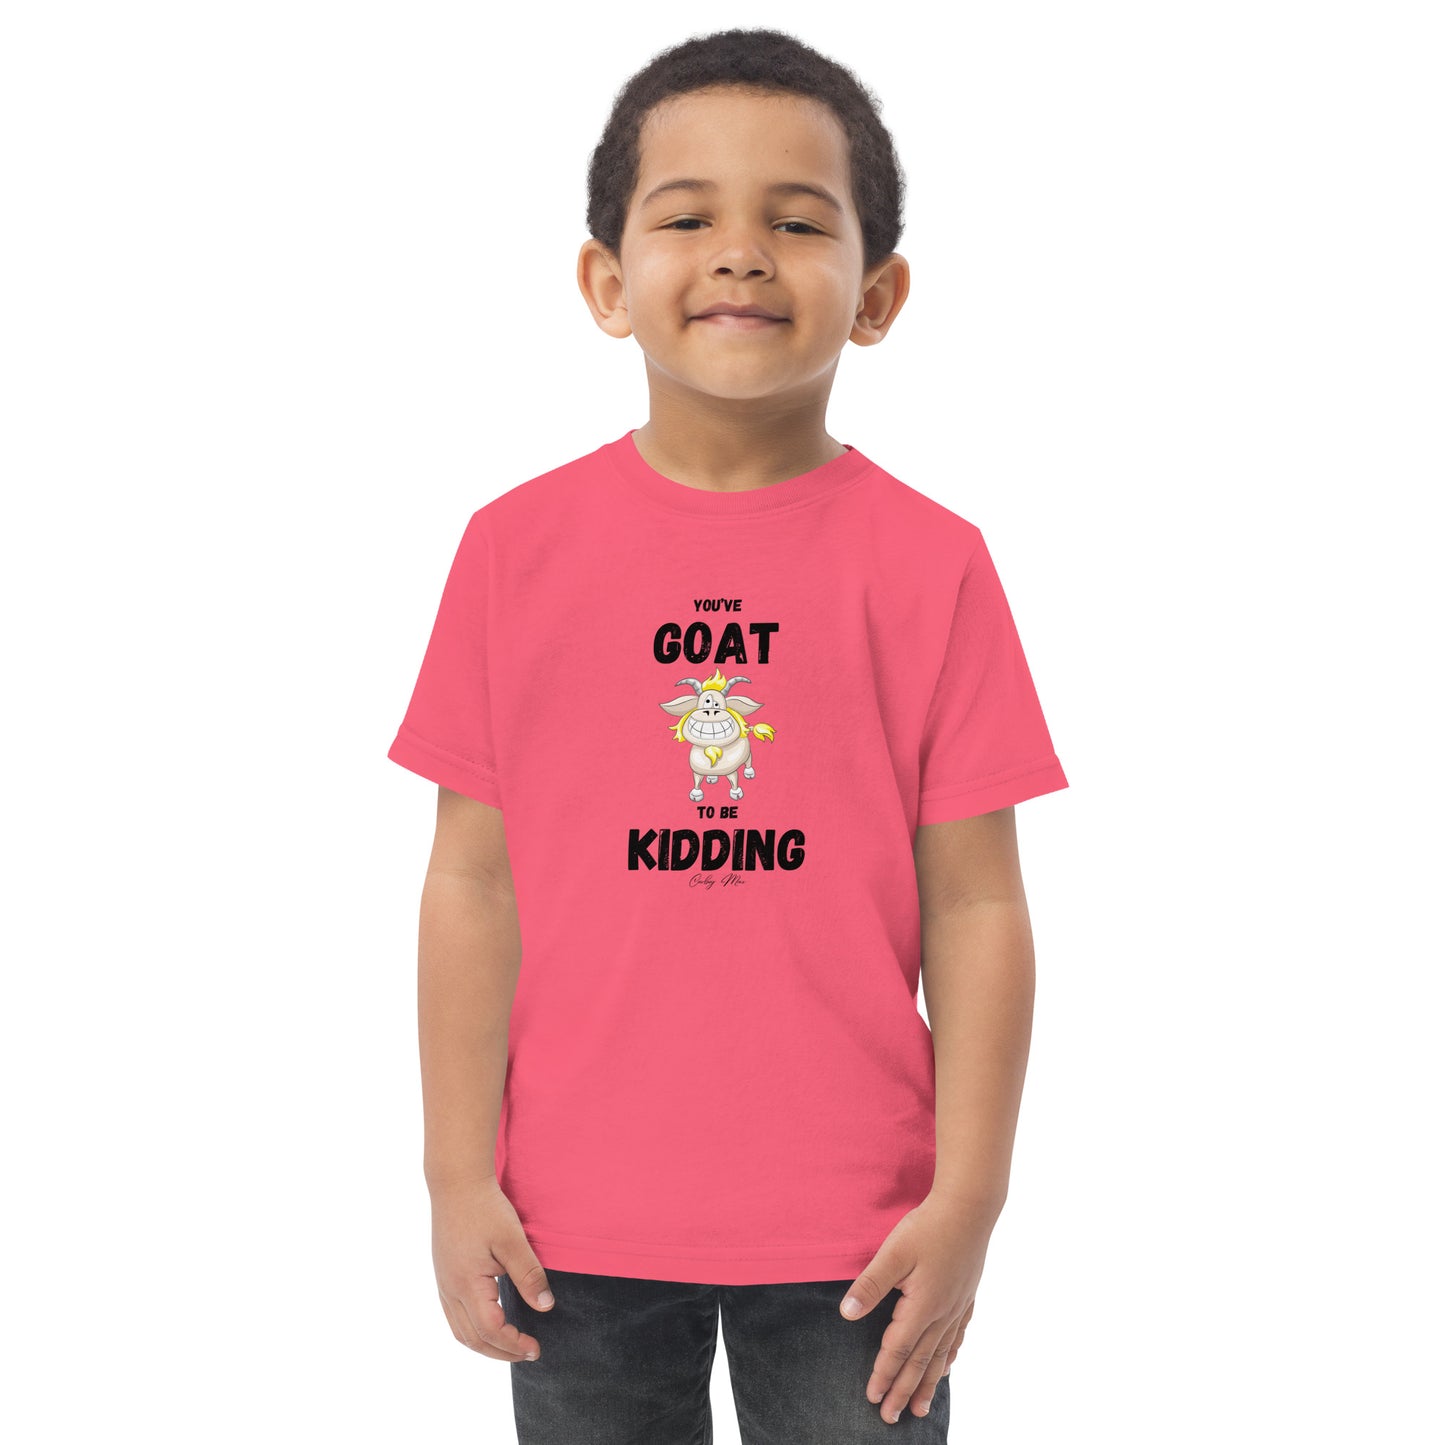 You’ve GOAT To Be Kidding: Toddler jersey t-shirt